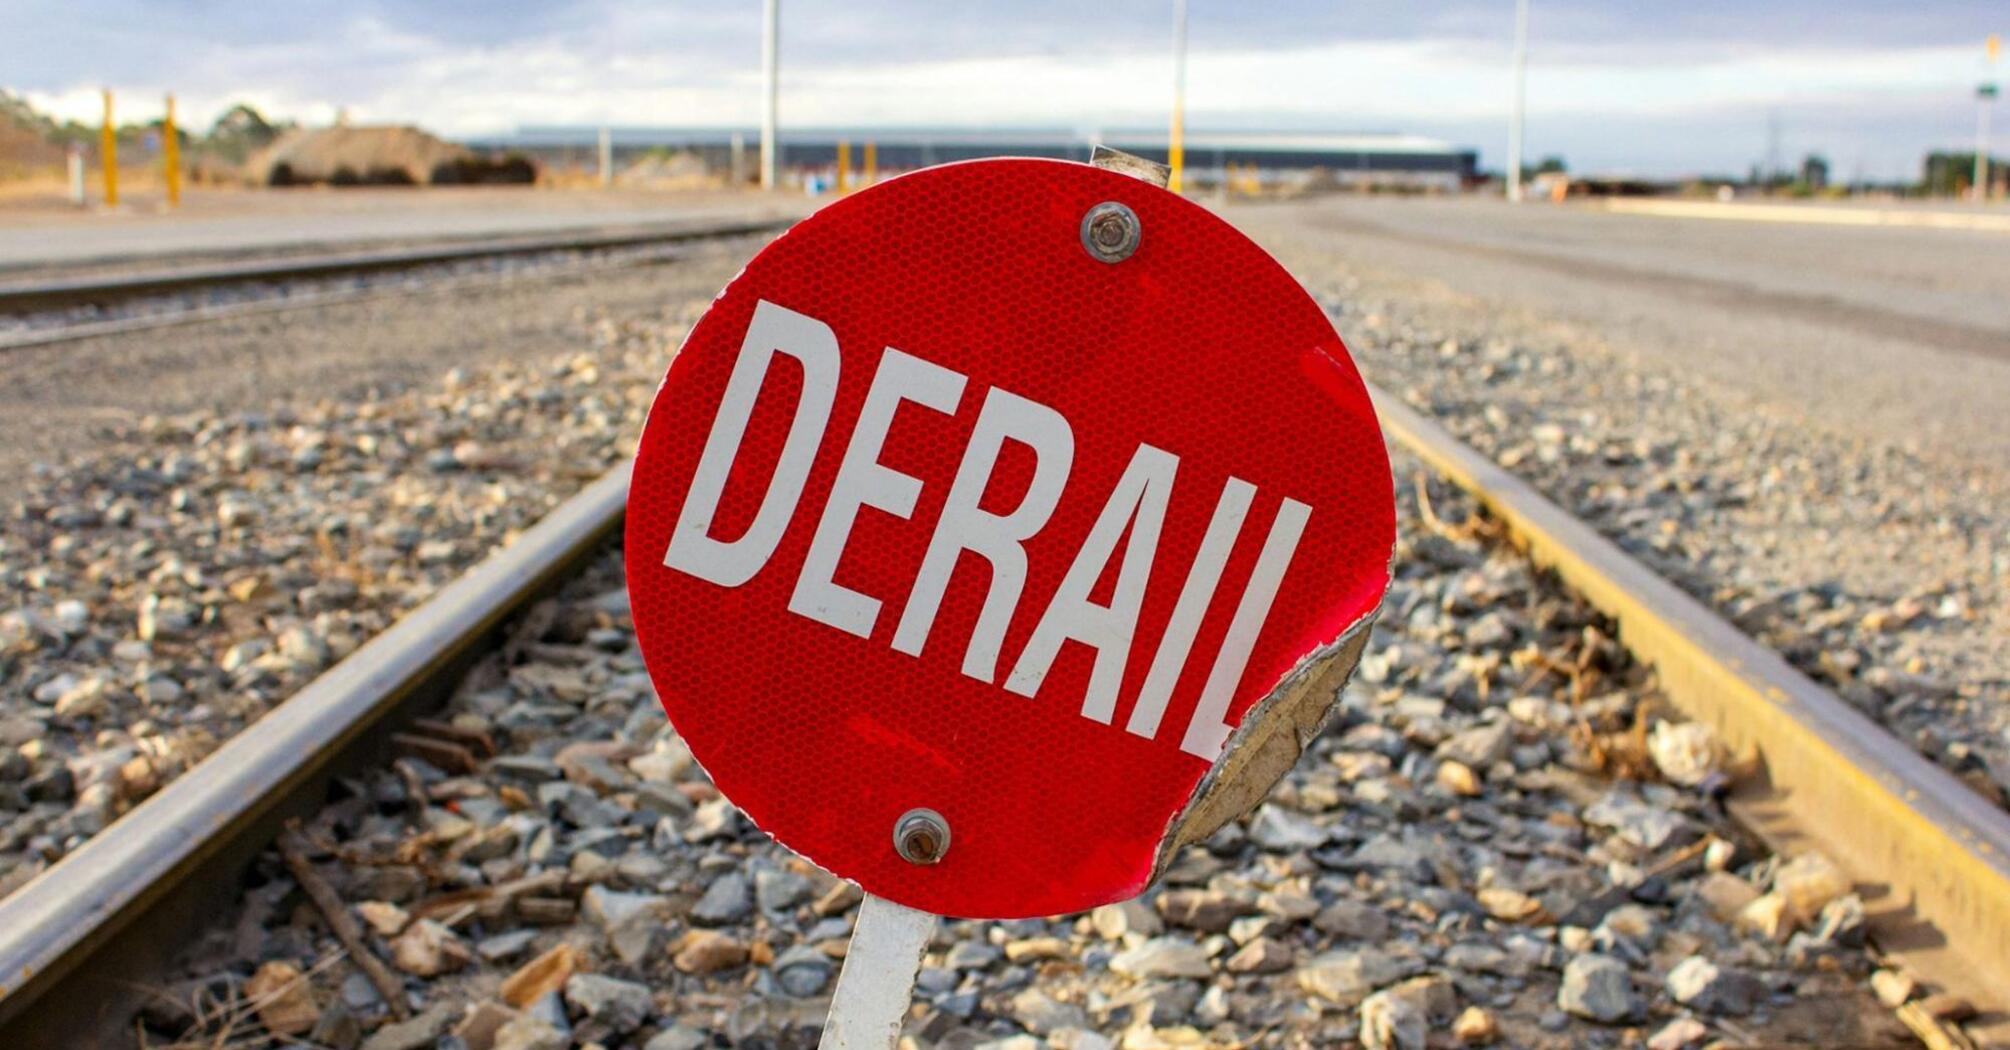 Red sign with the word 'Derail' on railway tracks